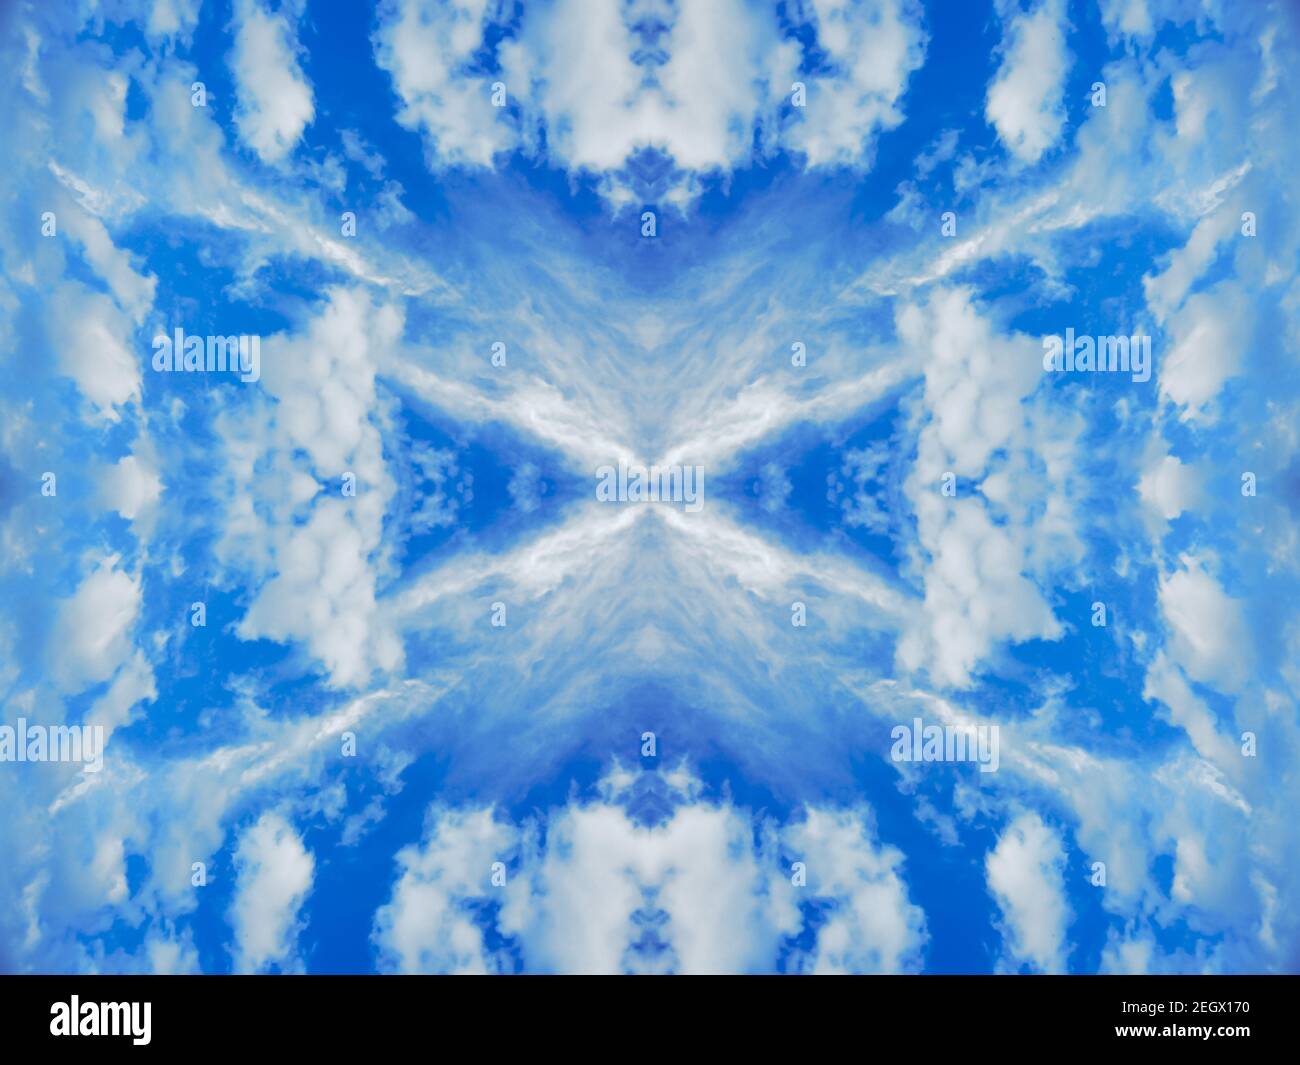 Blue sky with white clouds. Mirror reflection, symmetric pattern. Blurred textured background with kaleidoscope effect. Abstract natural wallpaper Stock Photo